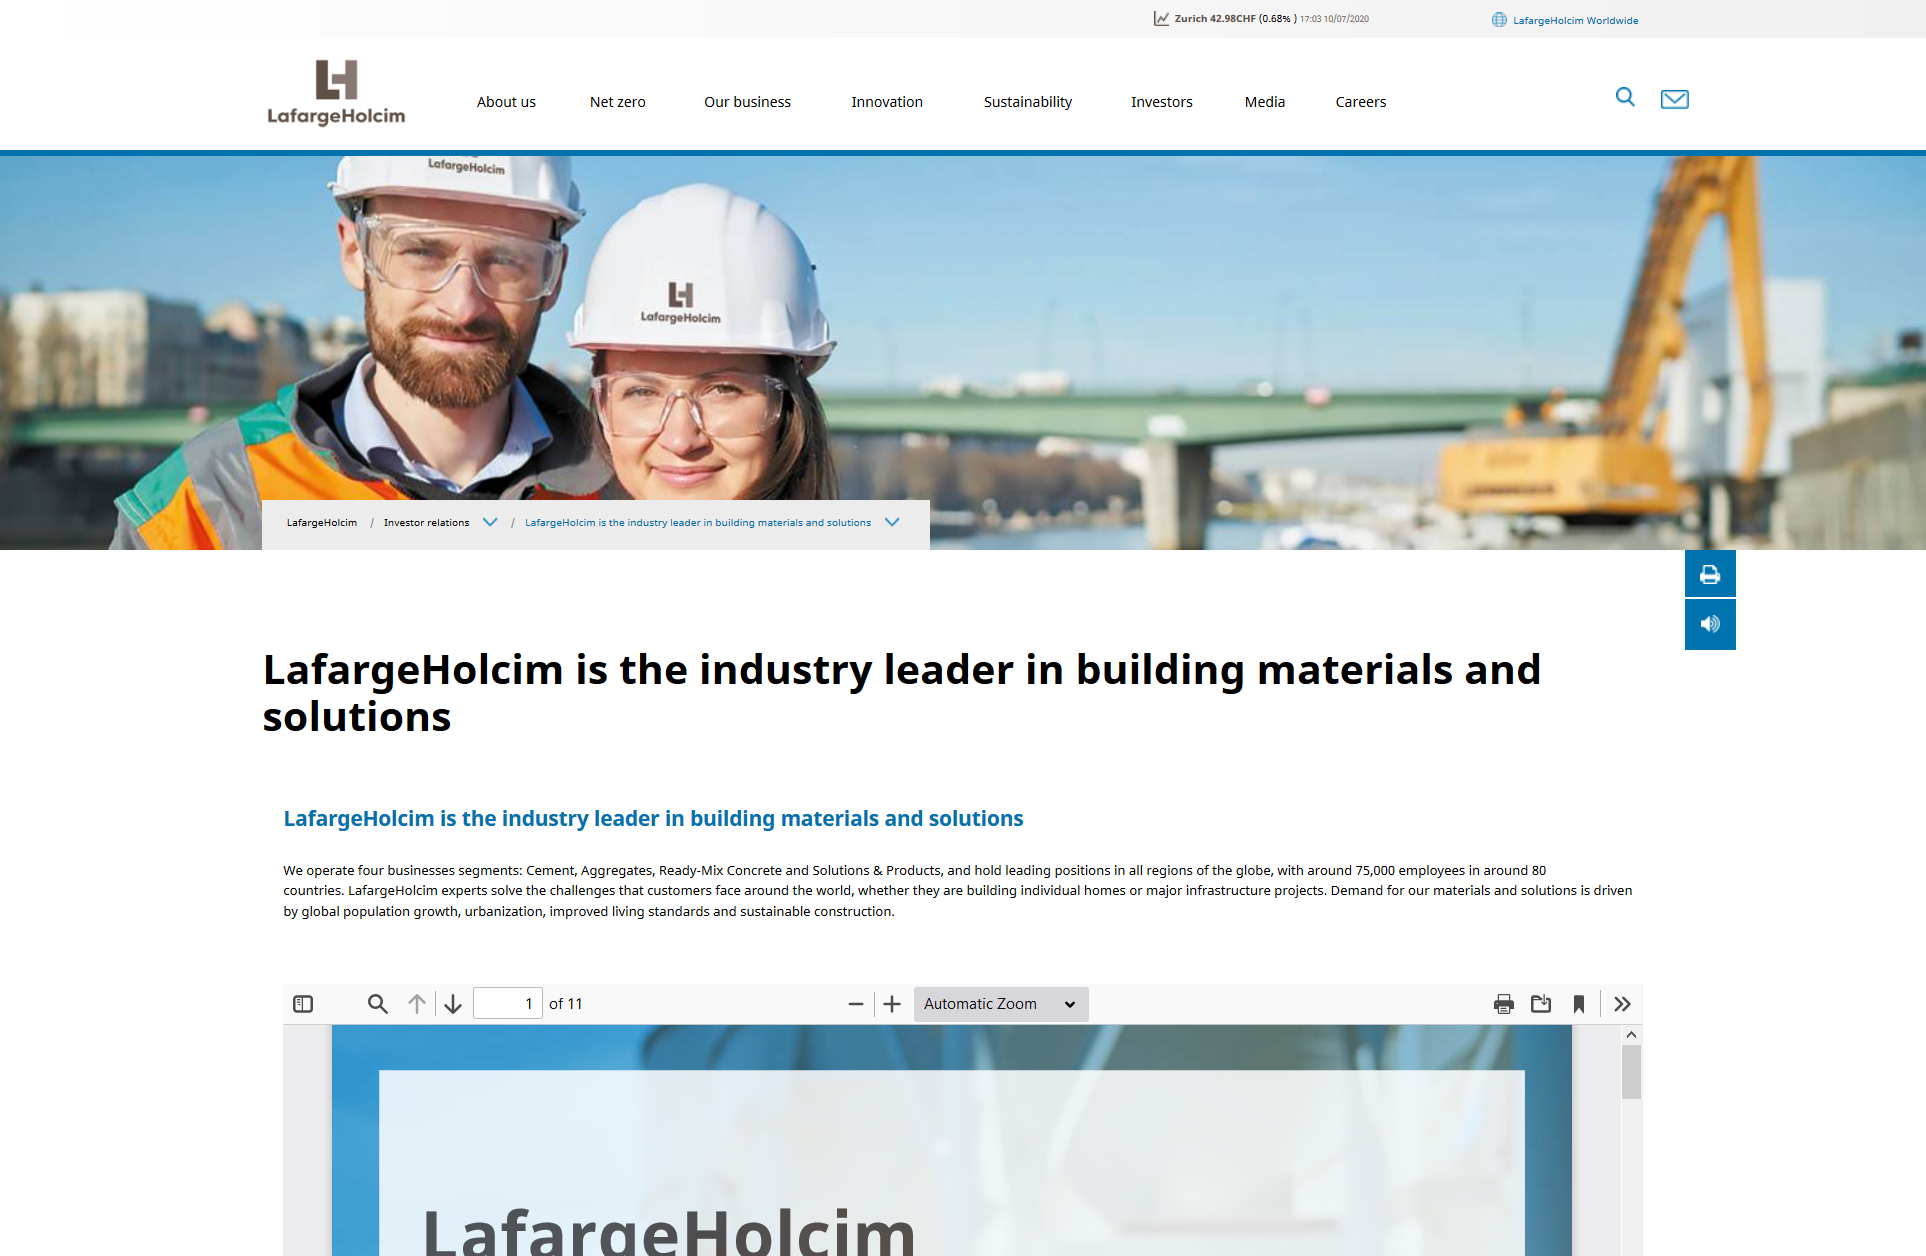 Screenshot_2020-10-07 LafargeHolcim is the industry leader in building materials and solutions.png